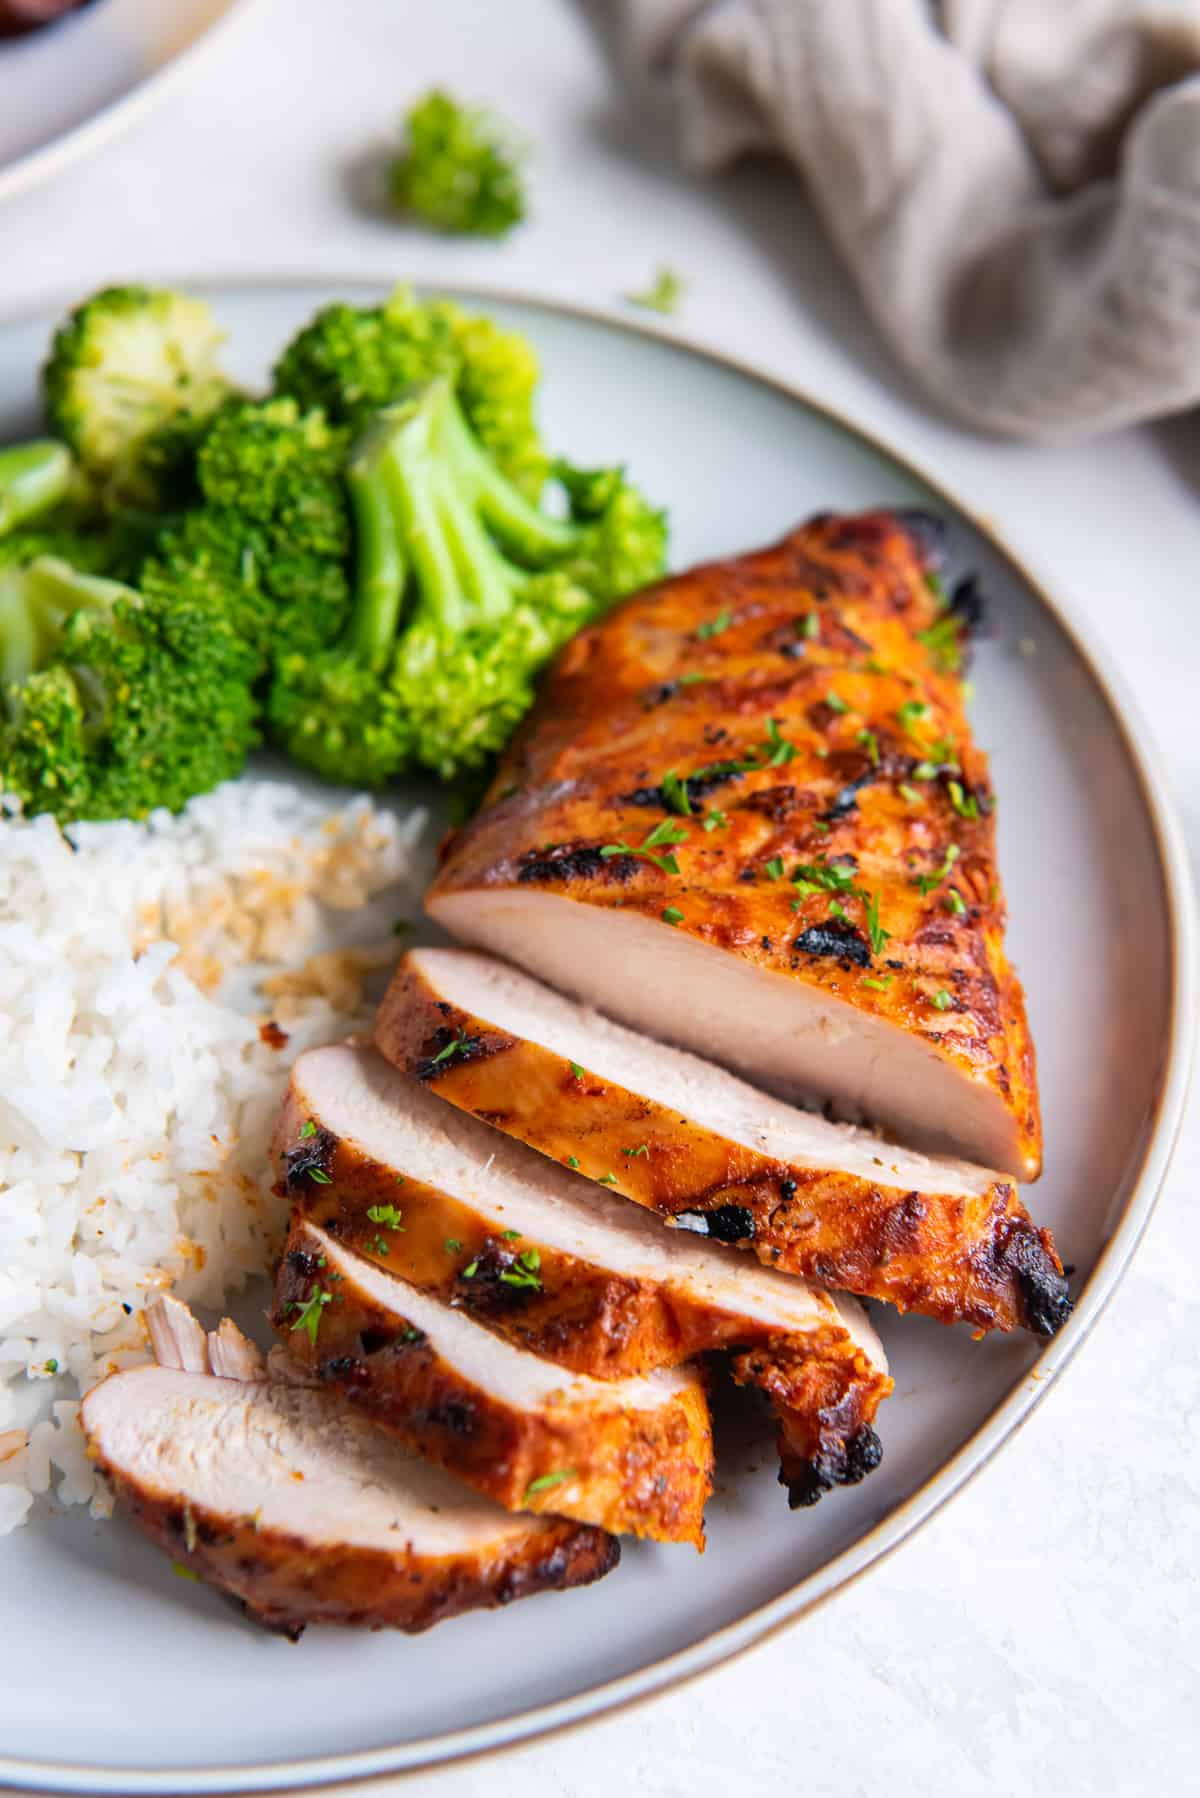 A sliced grilled chicken breast on a white plate with rice and broccoli.